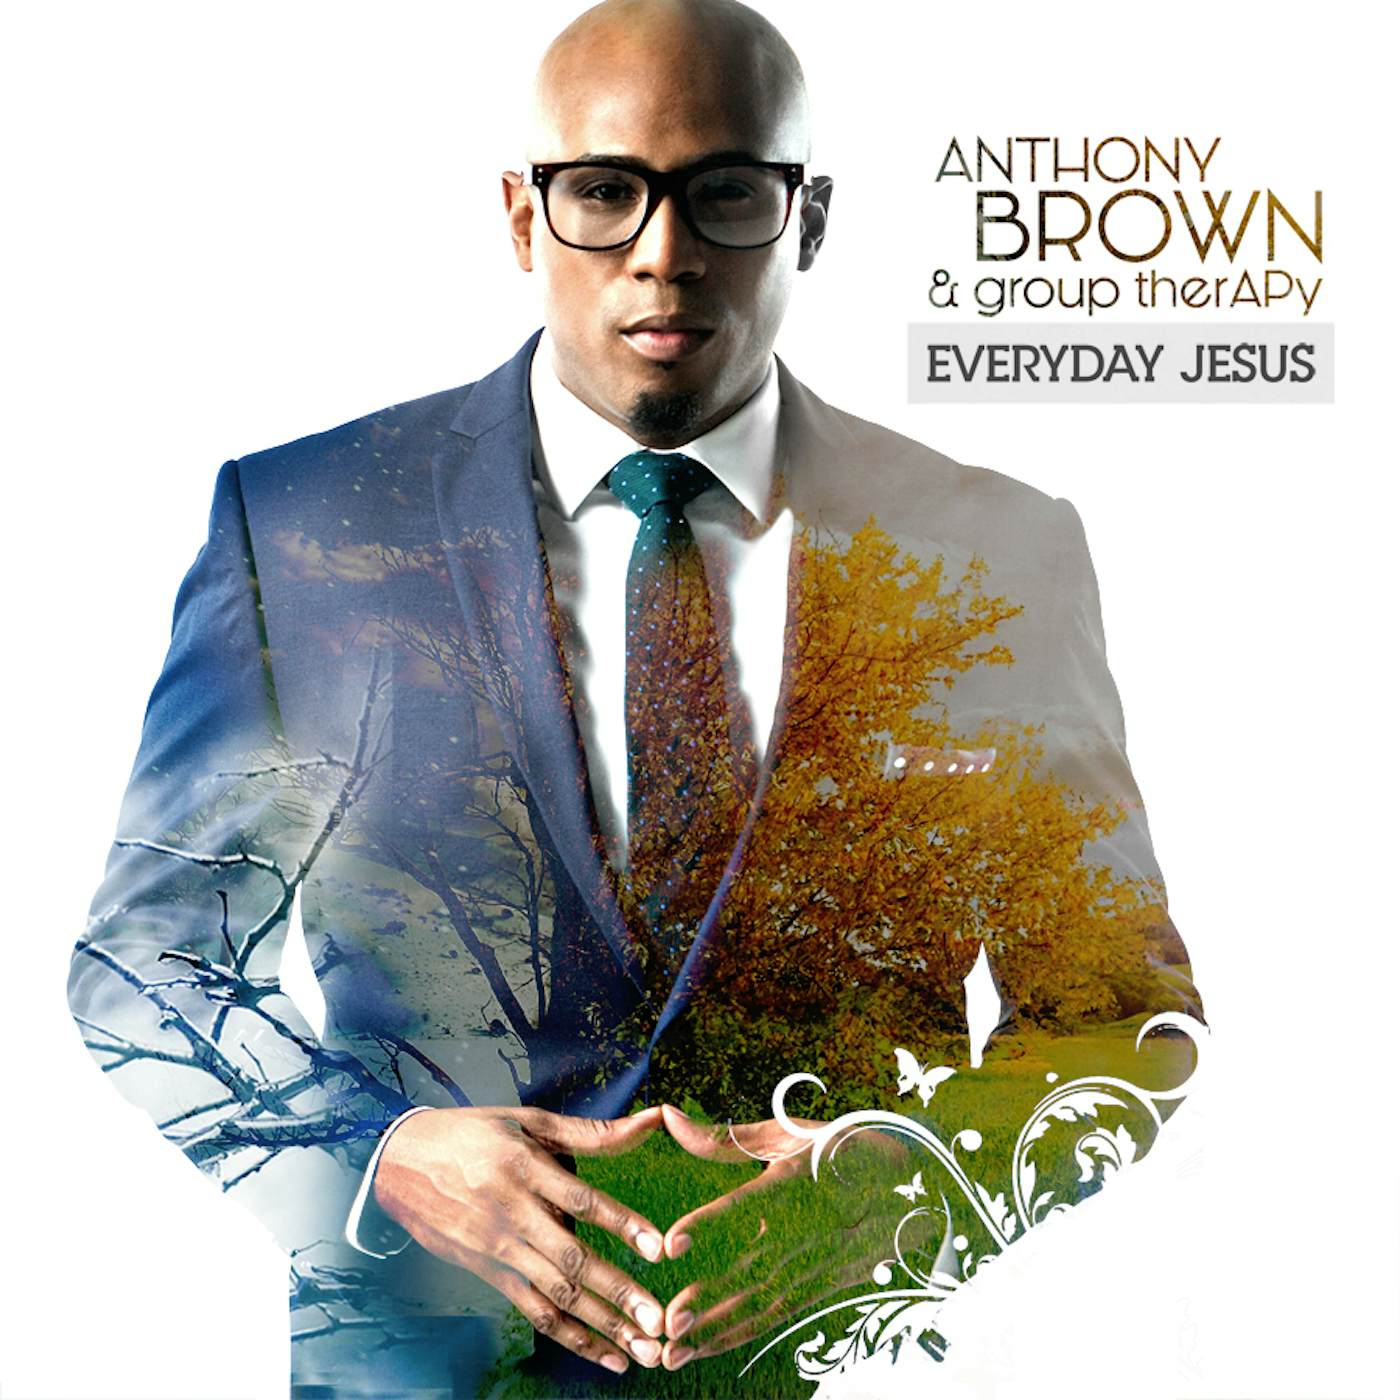 Anthony Brown & group therAPy EVERYDAY JESUS CD